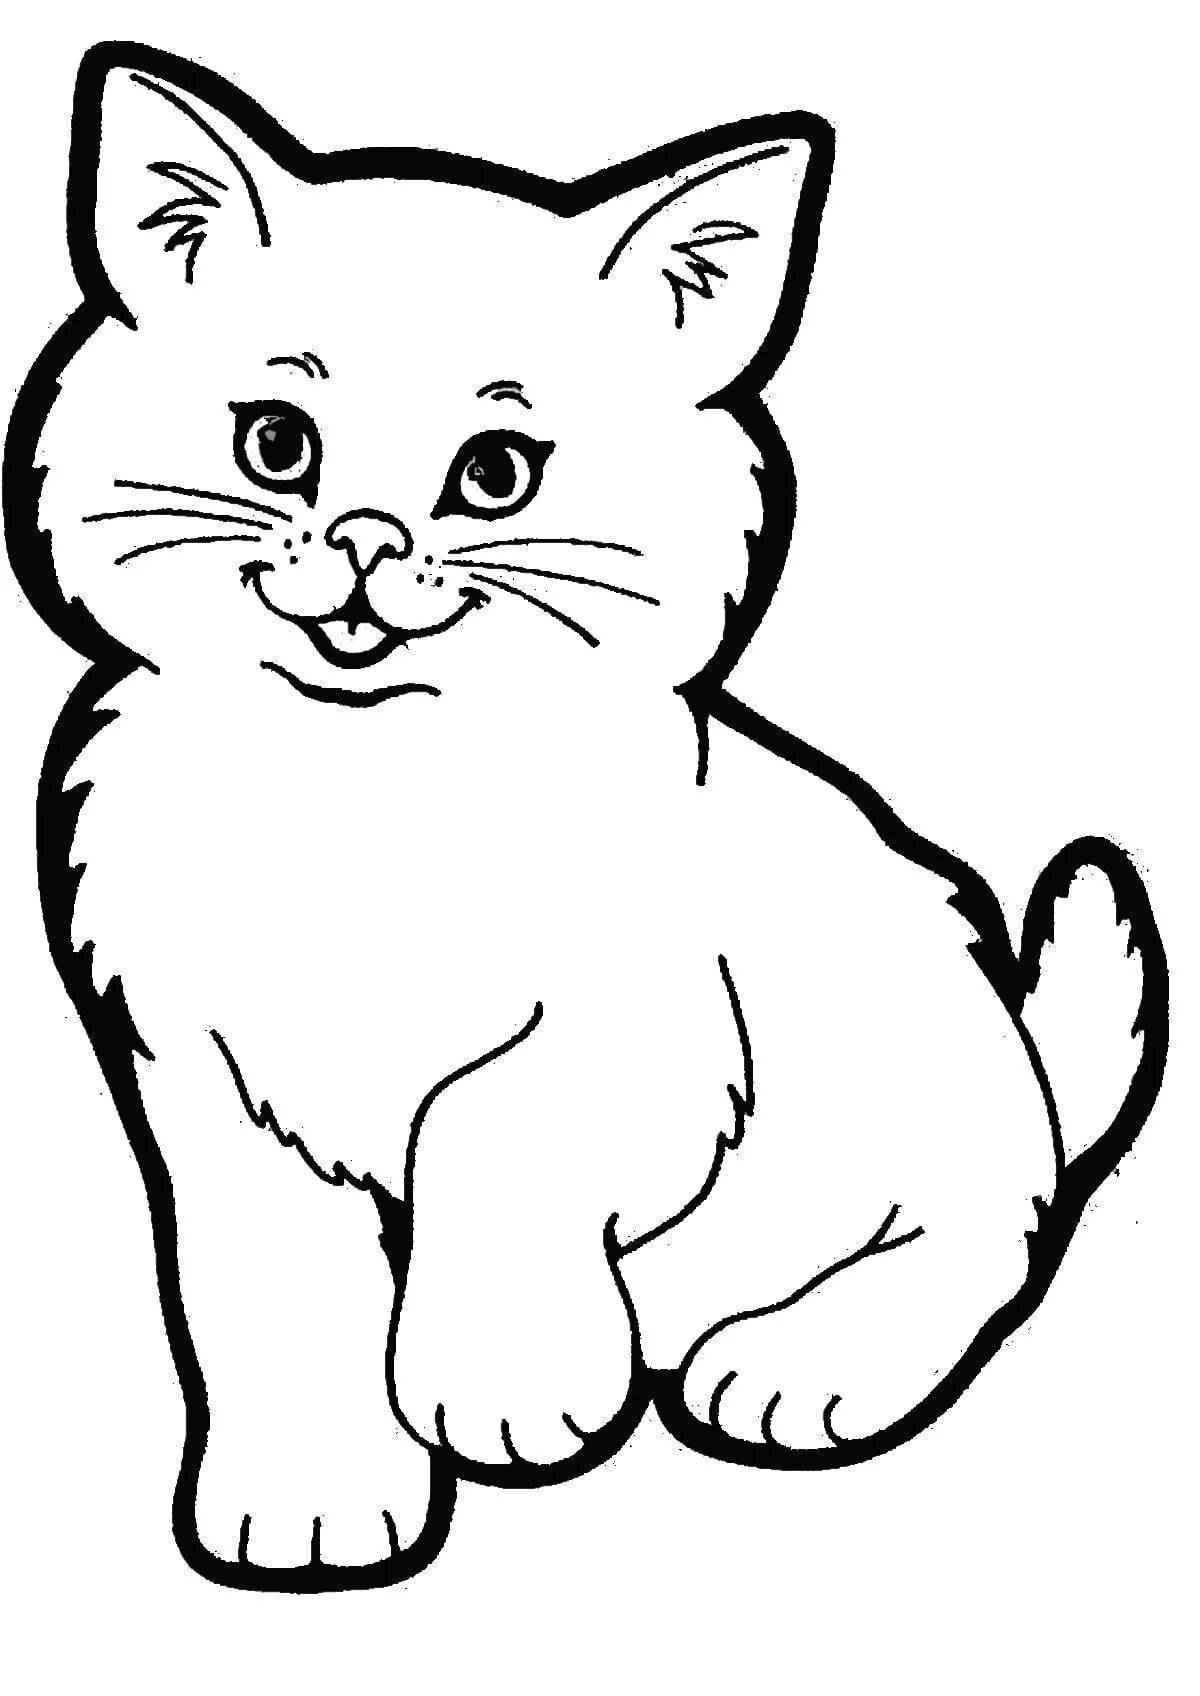 Cute cat coloring book for kids 2-3 years old